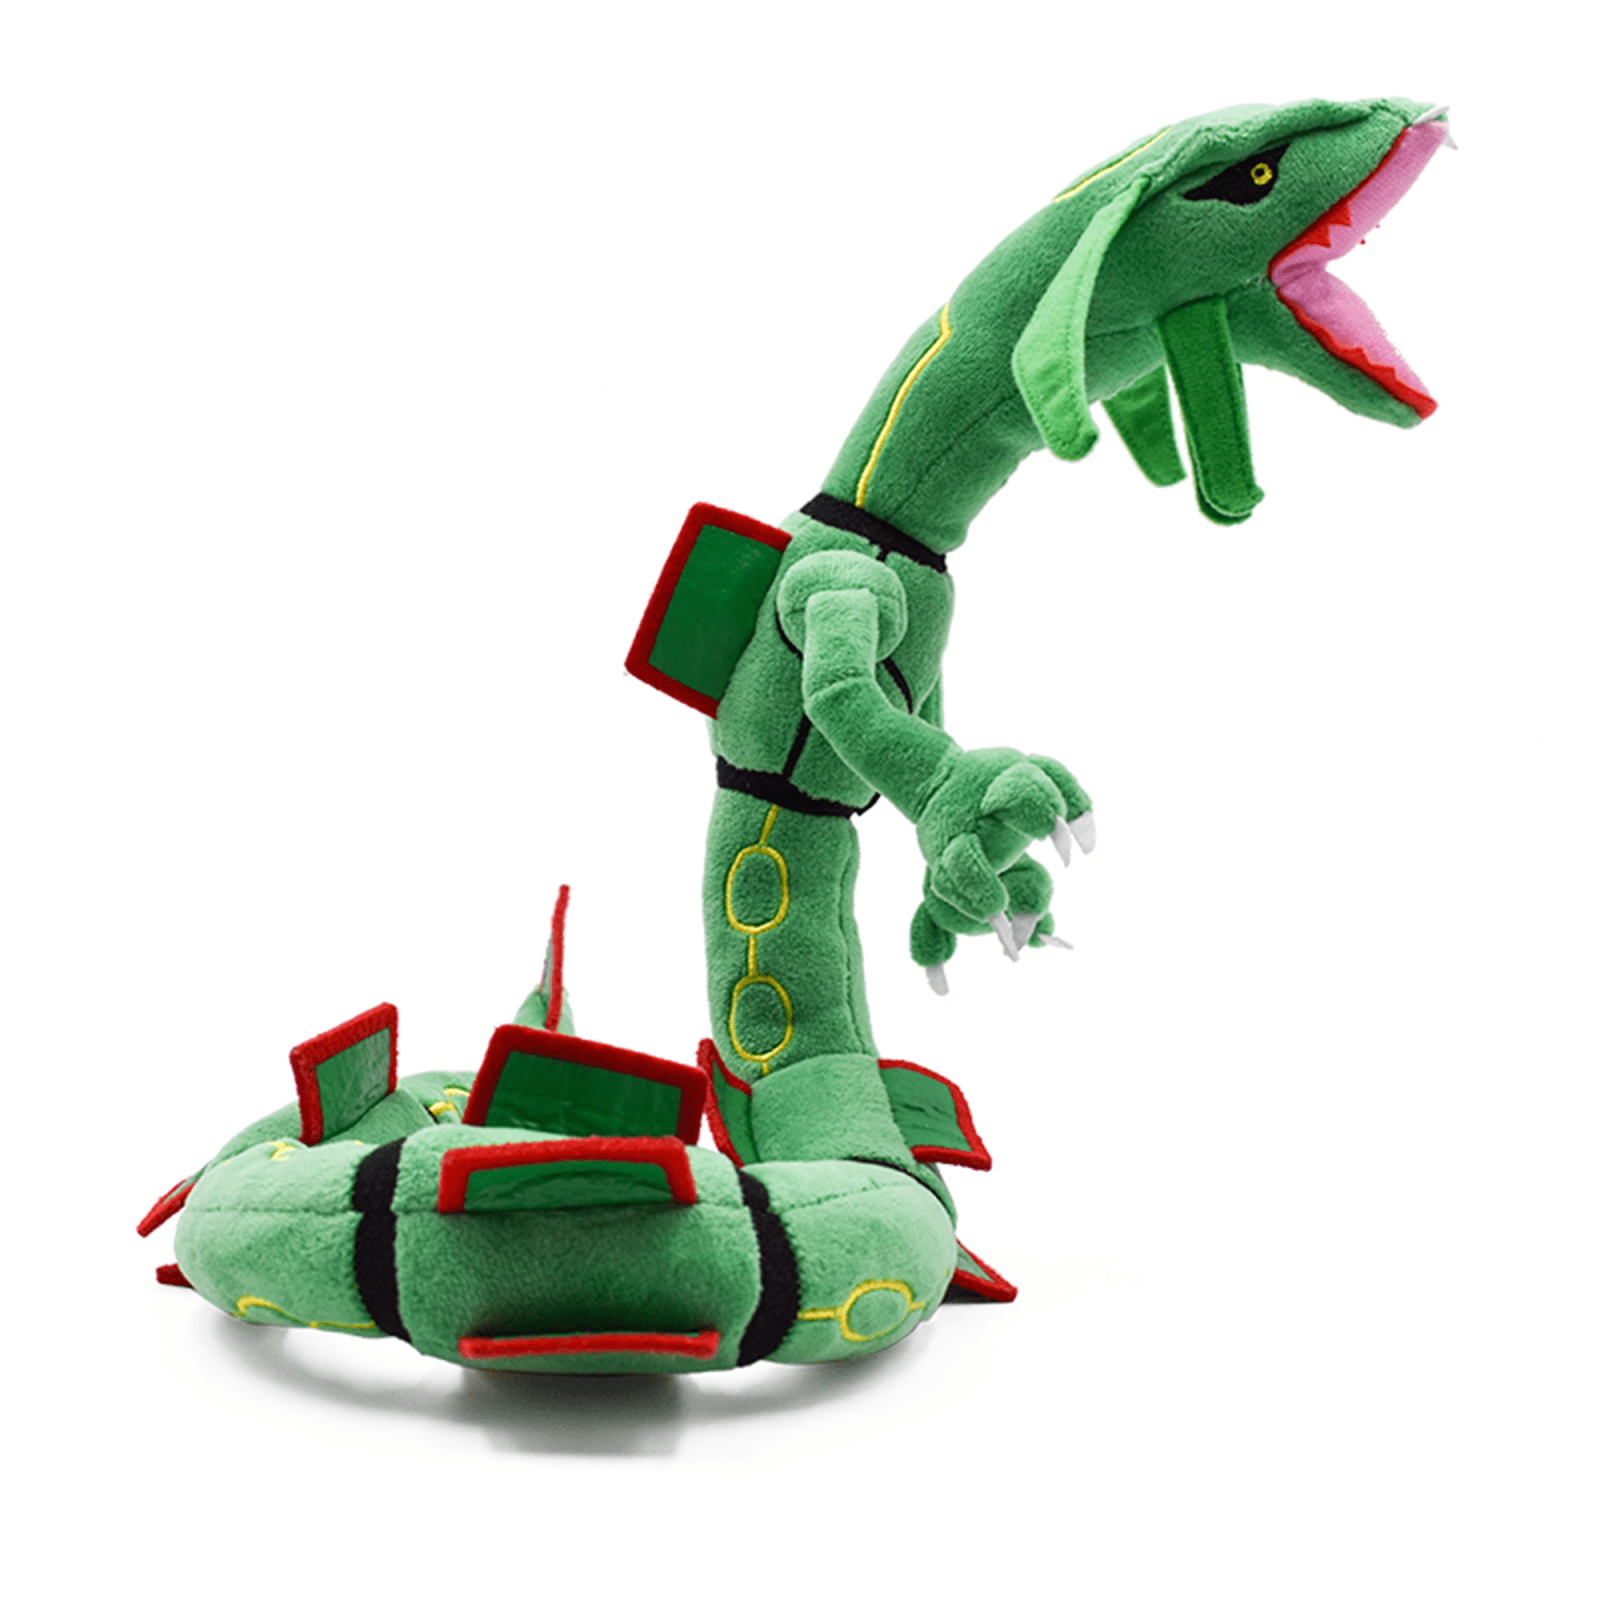 SUOUEM Rayquaza Plush Doll Stuffed Figure Toy 31 inch Gift Green 